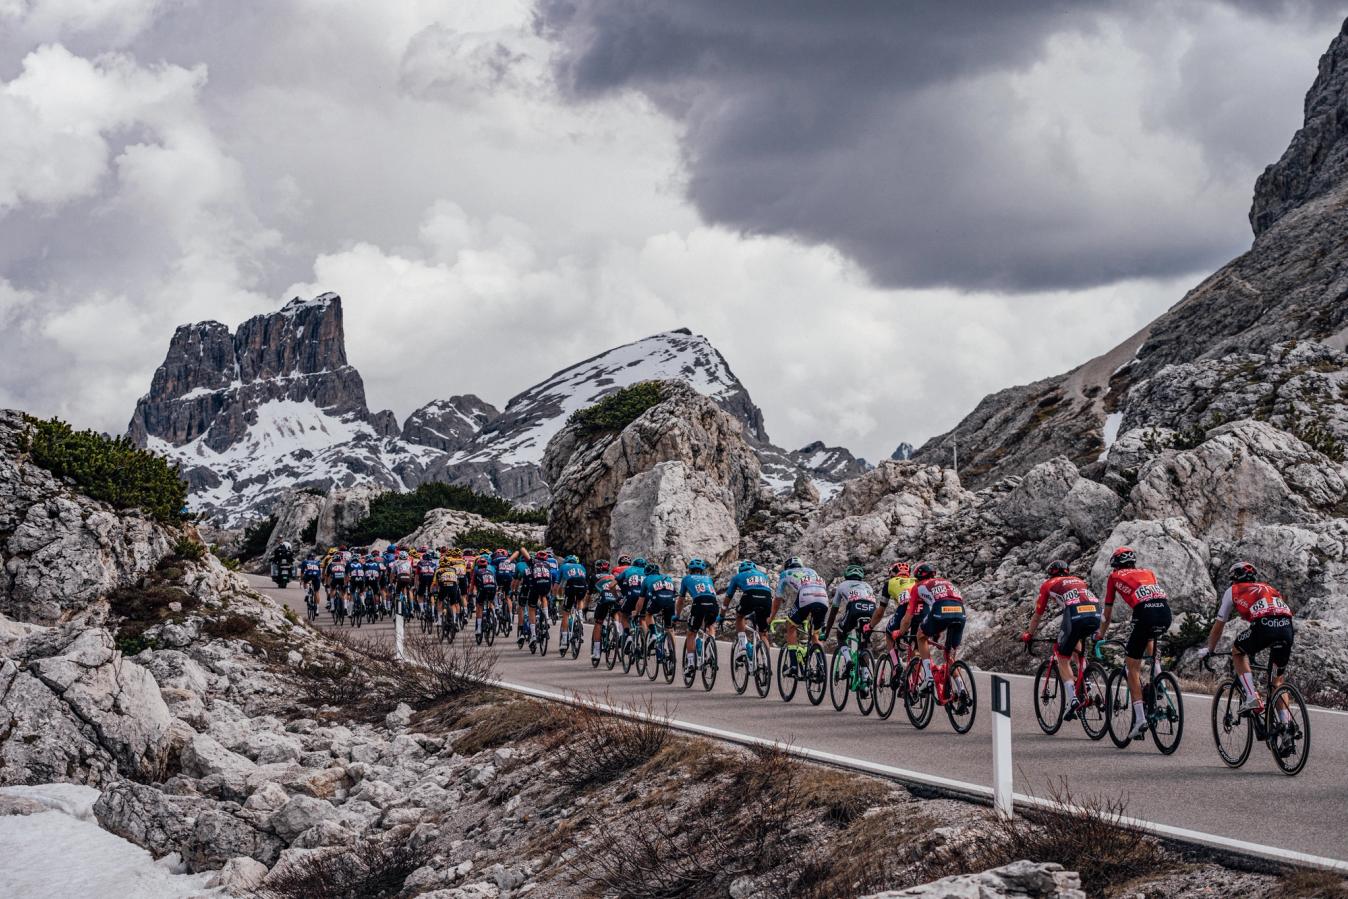 One of the moments Zac Williams captured from stage 19 in the Giro d'Italia